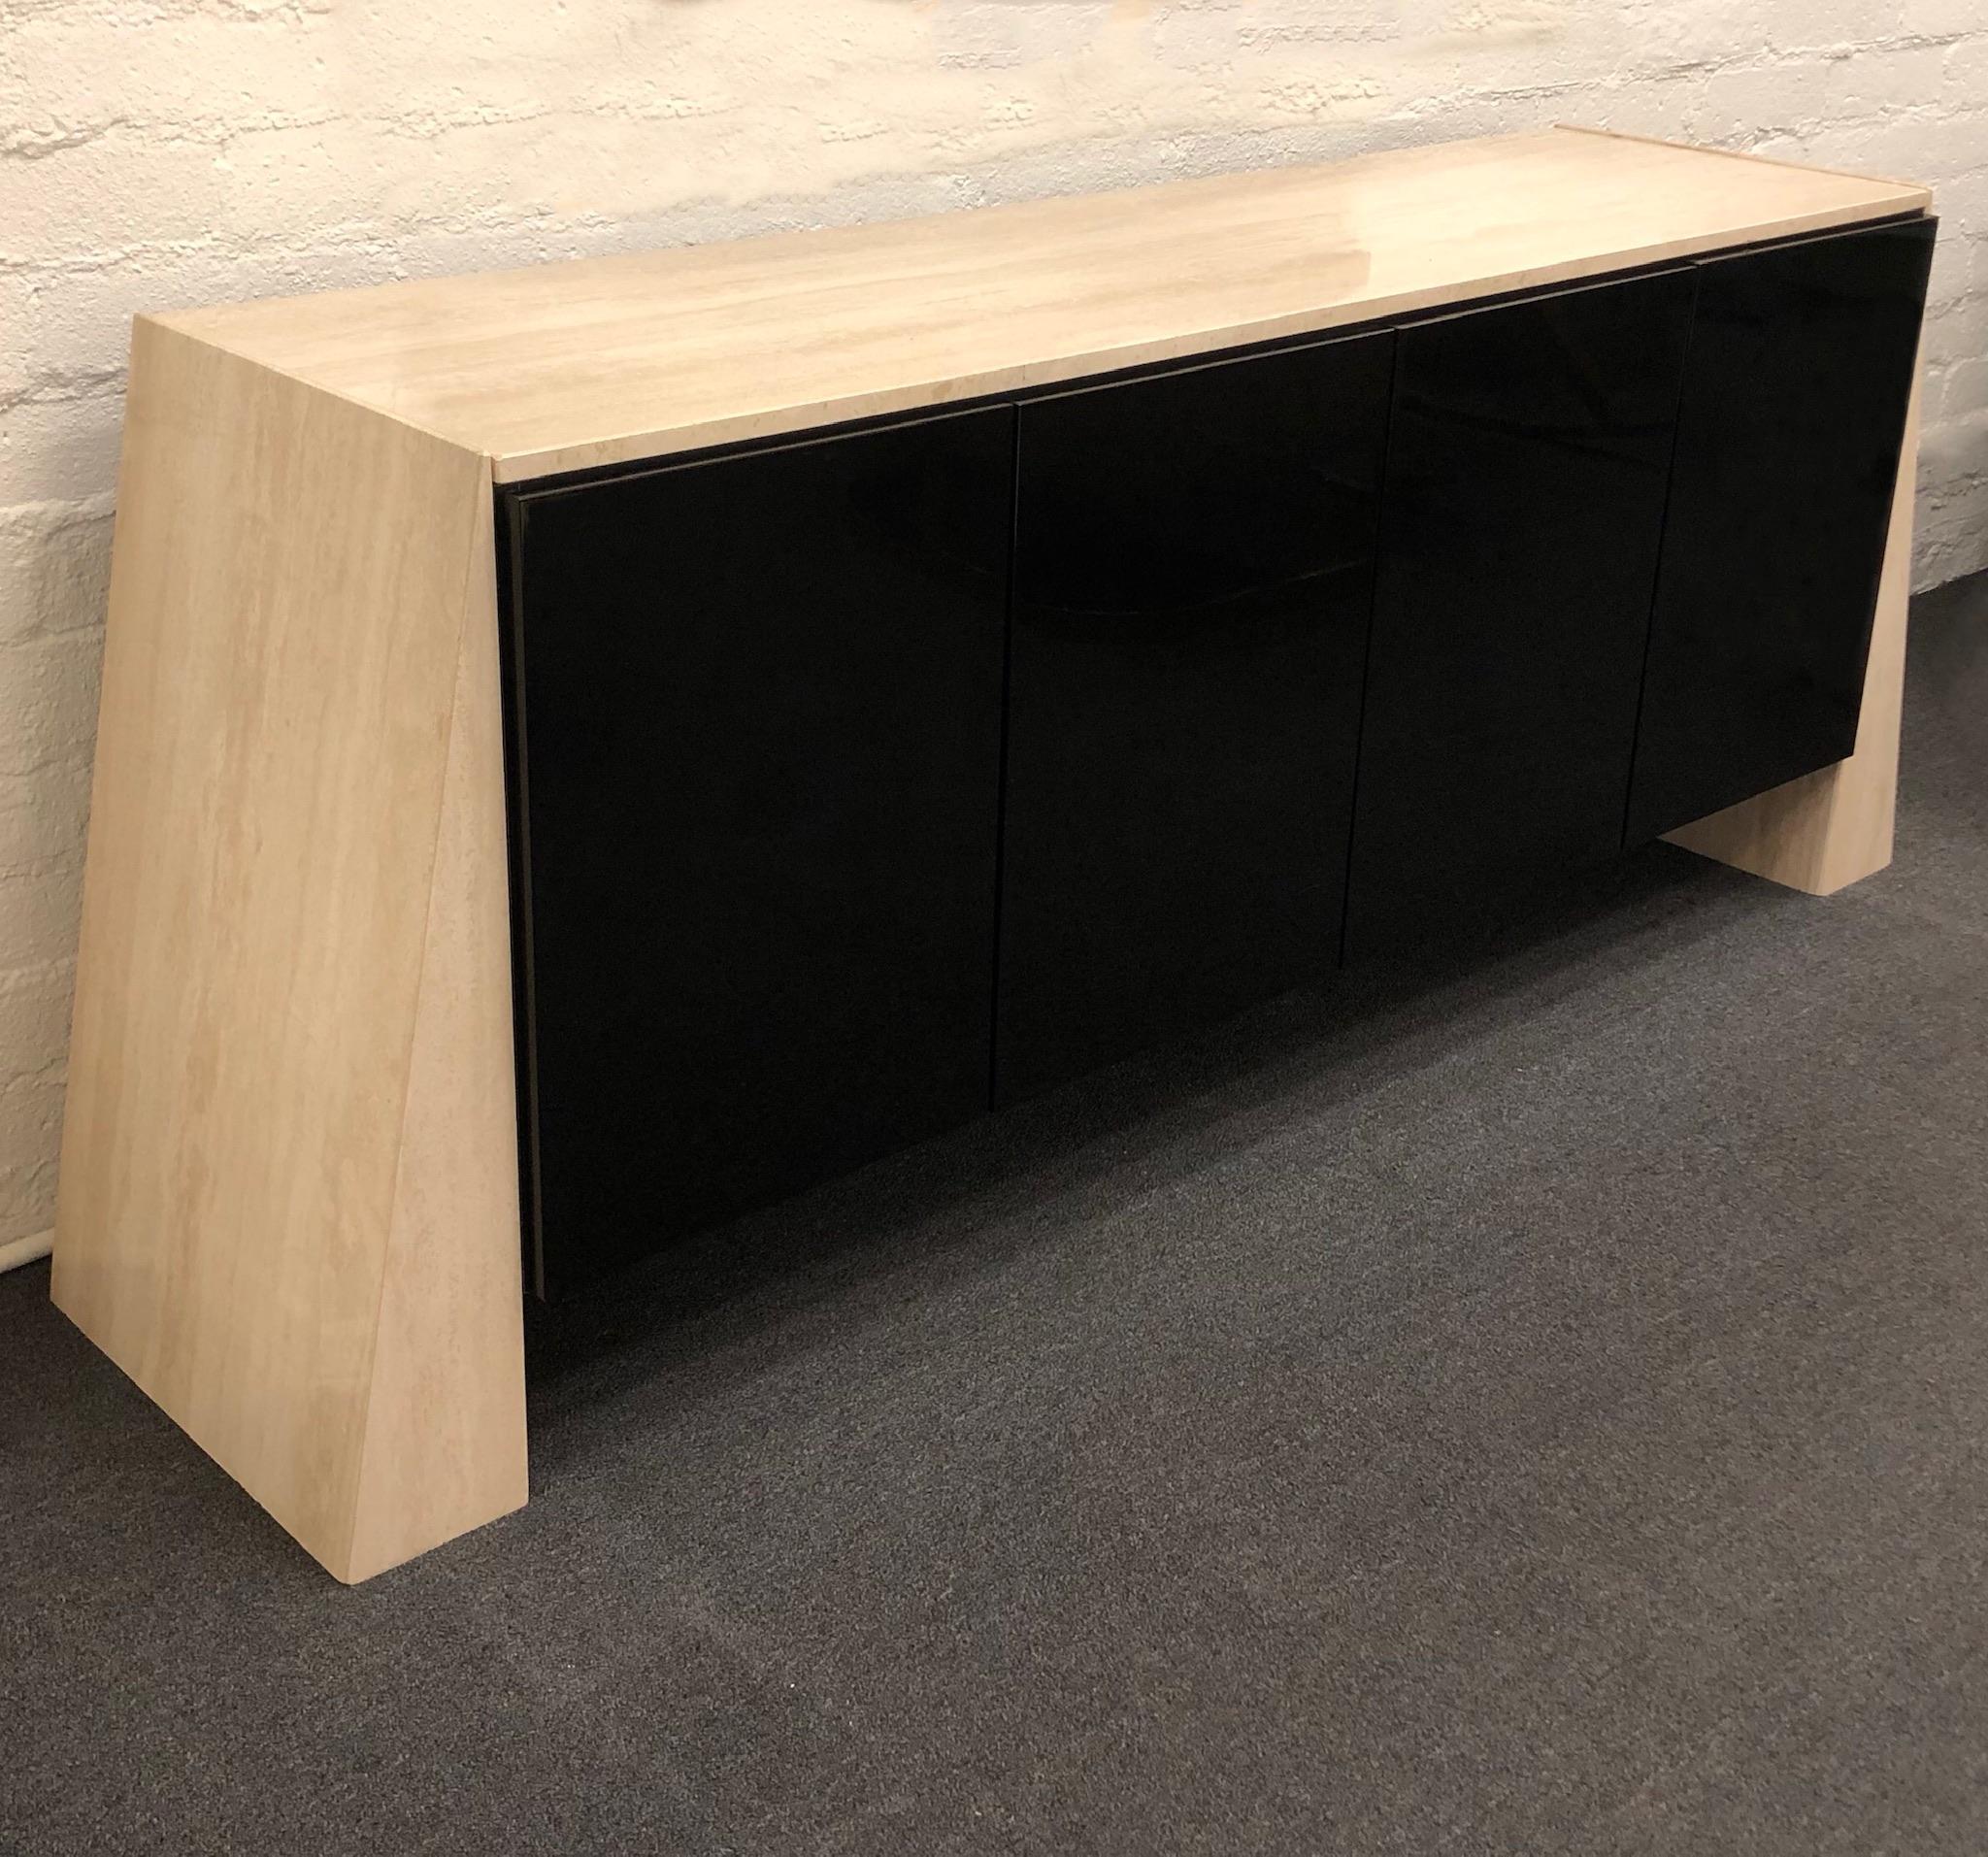 A spectacular polish Italian travertine and polish black lacquer credenza from the 1980s. The inside is all black on one side there’s a drawer with a dinner wear organizer and an adjustable shelf. Newly professionally polished.
Dimensions: 84” wide